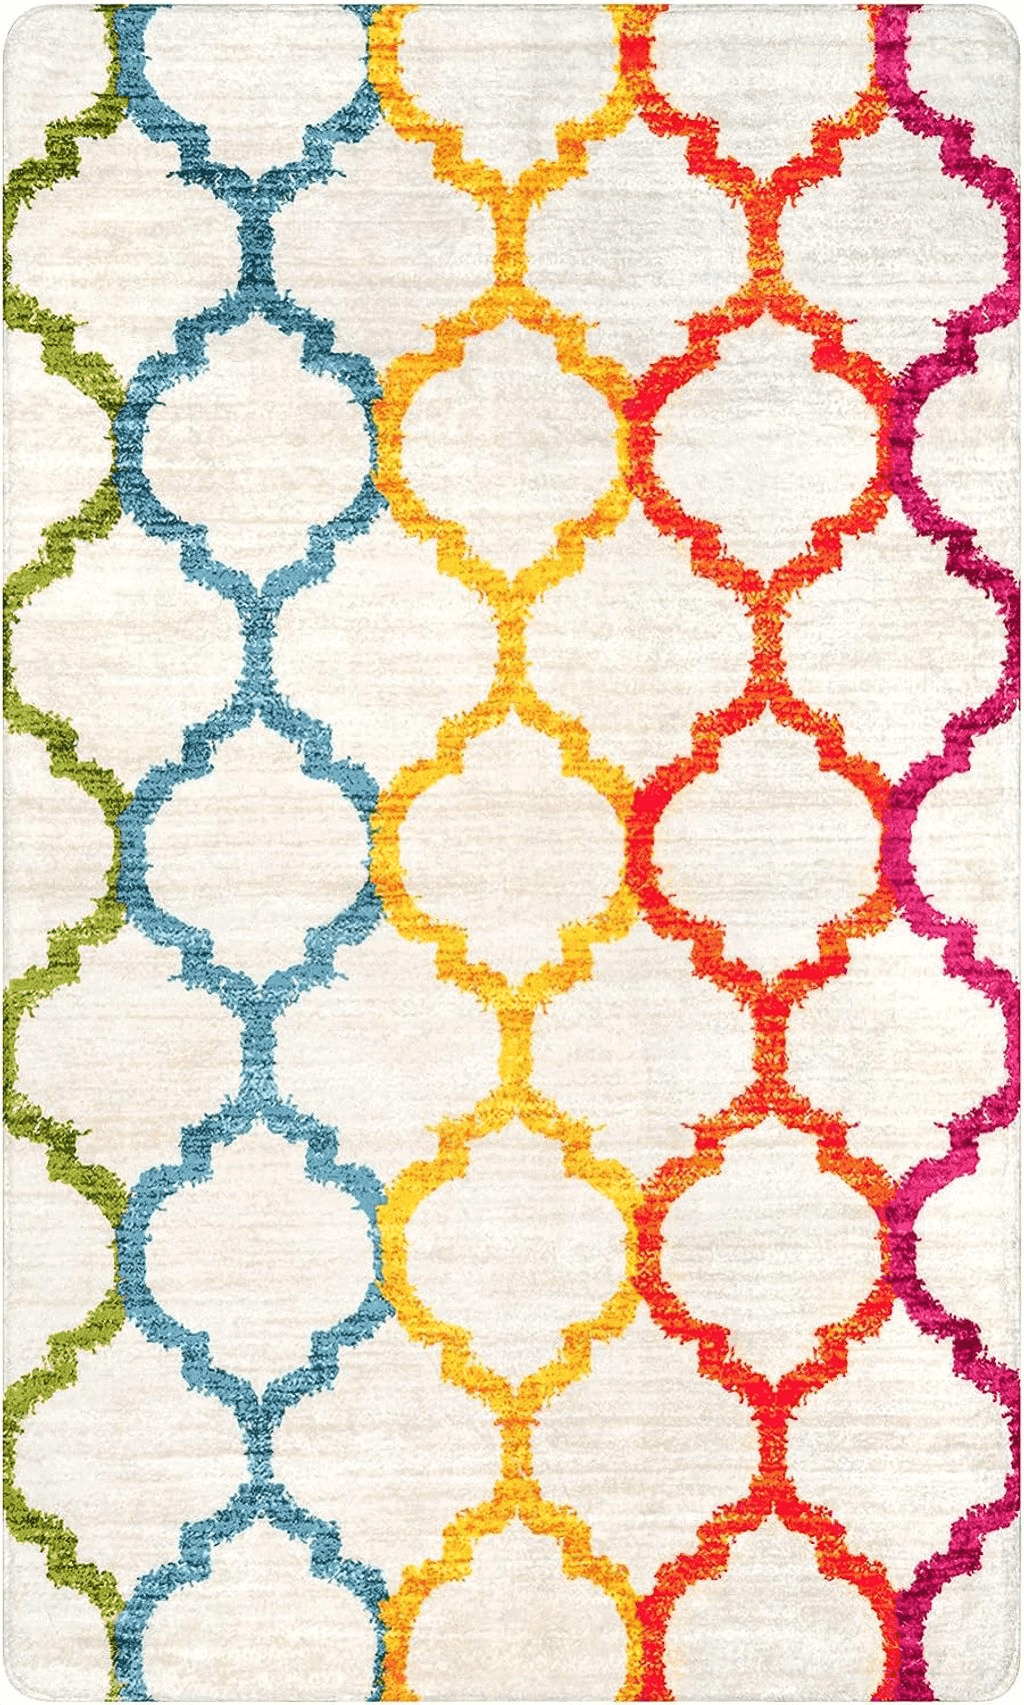 Rainbow Lahome Moroccan Colorful Living Room Area Rug - 3x5 Washable Throw Soft Rugs for Bedroom Carpet Non-Slip Low-Plie Entryway Kitchen Rugs Rainbow Print Distressed Floor Carpet for Kids Nursery Office